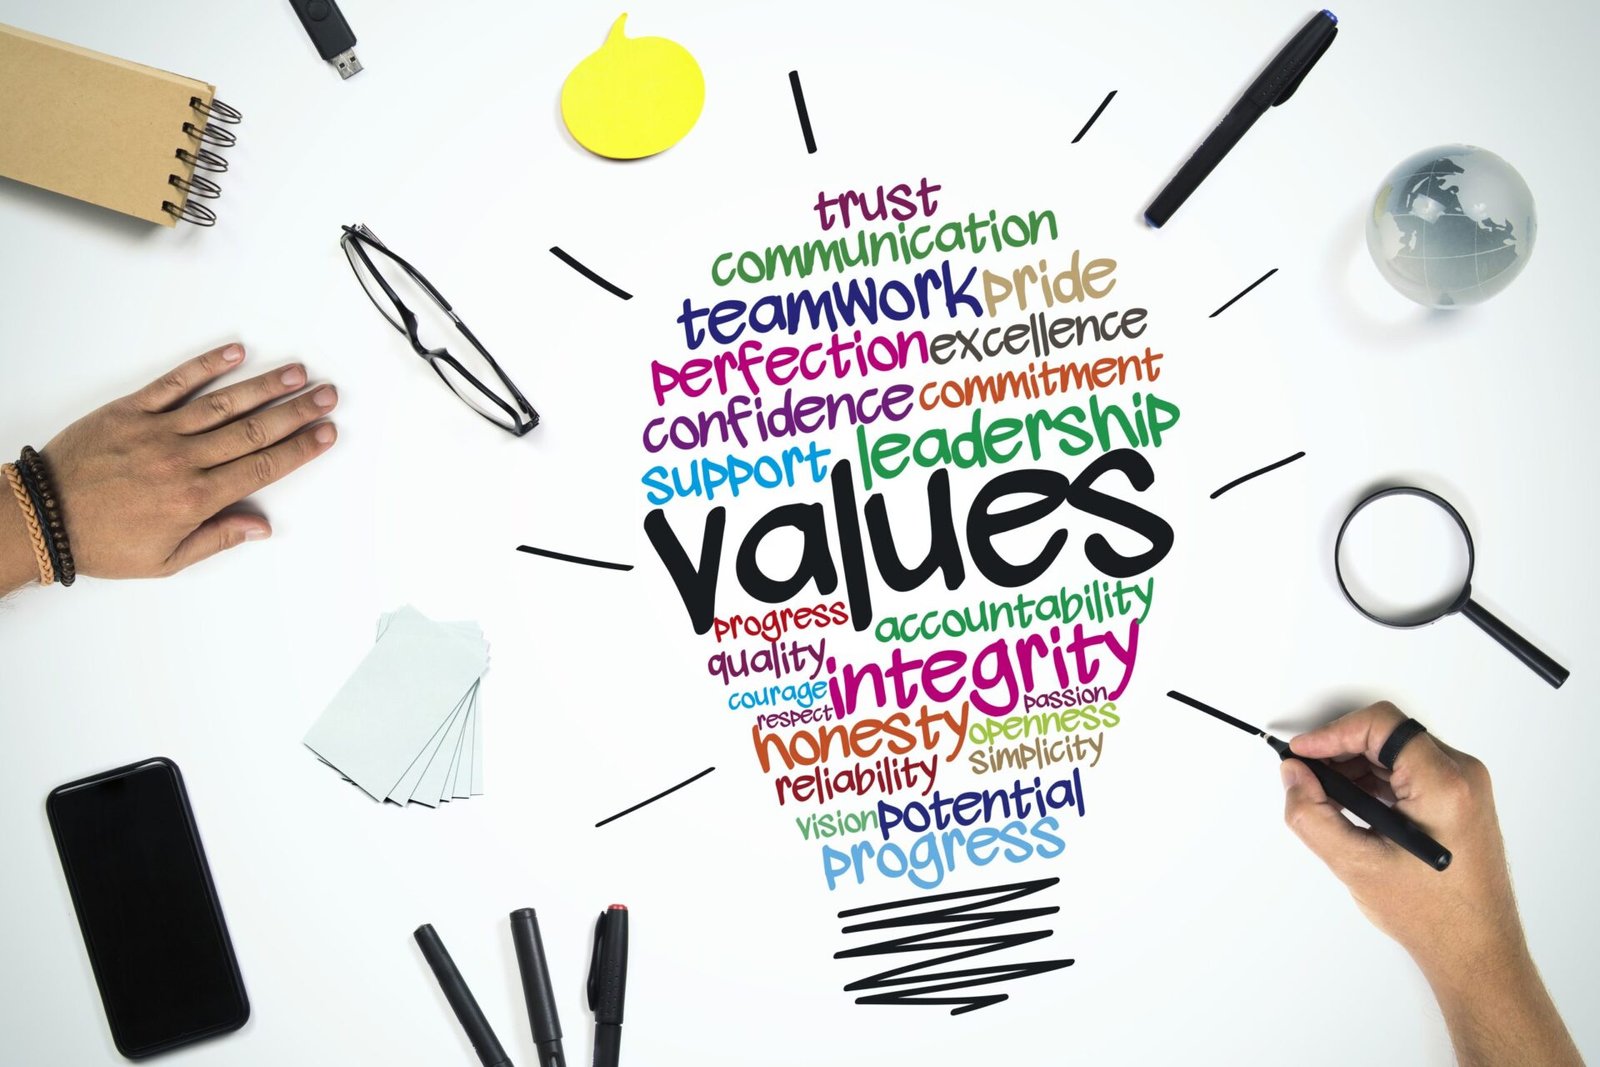 What are Values, and Why are They Important?